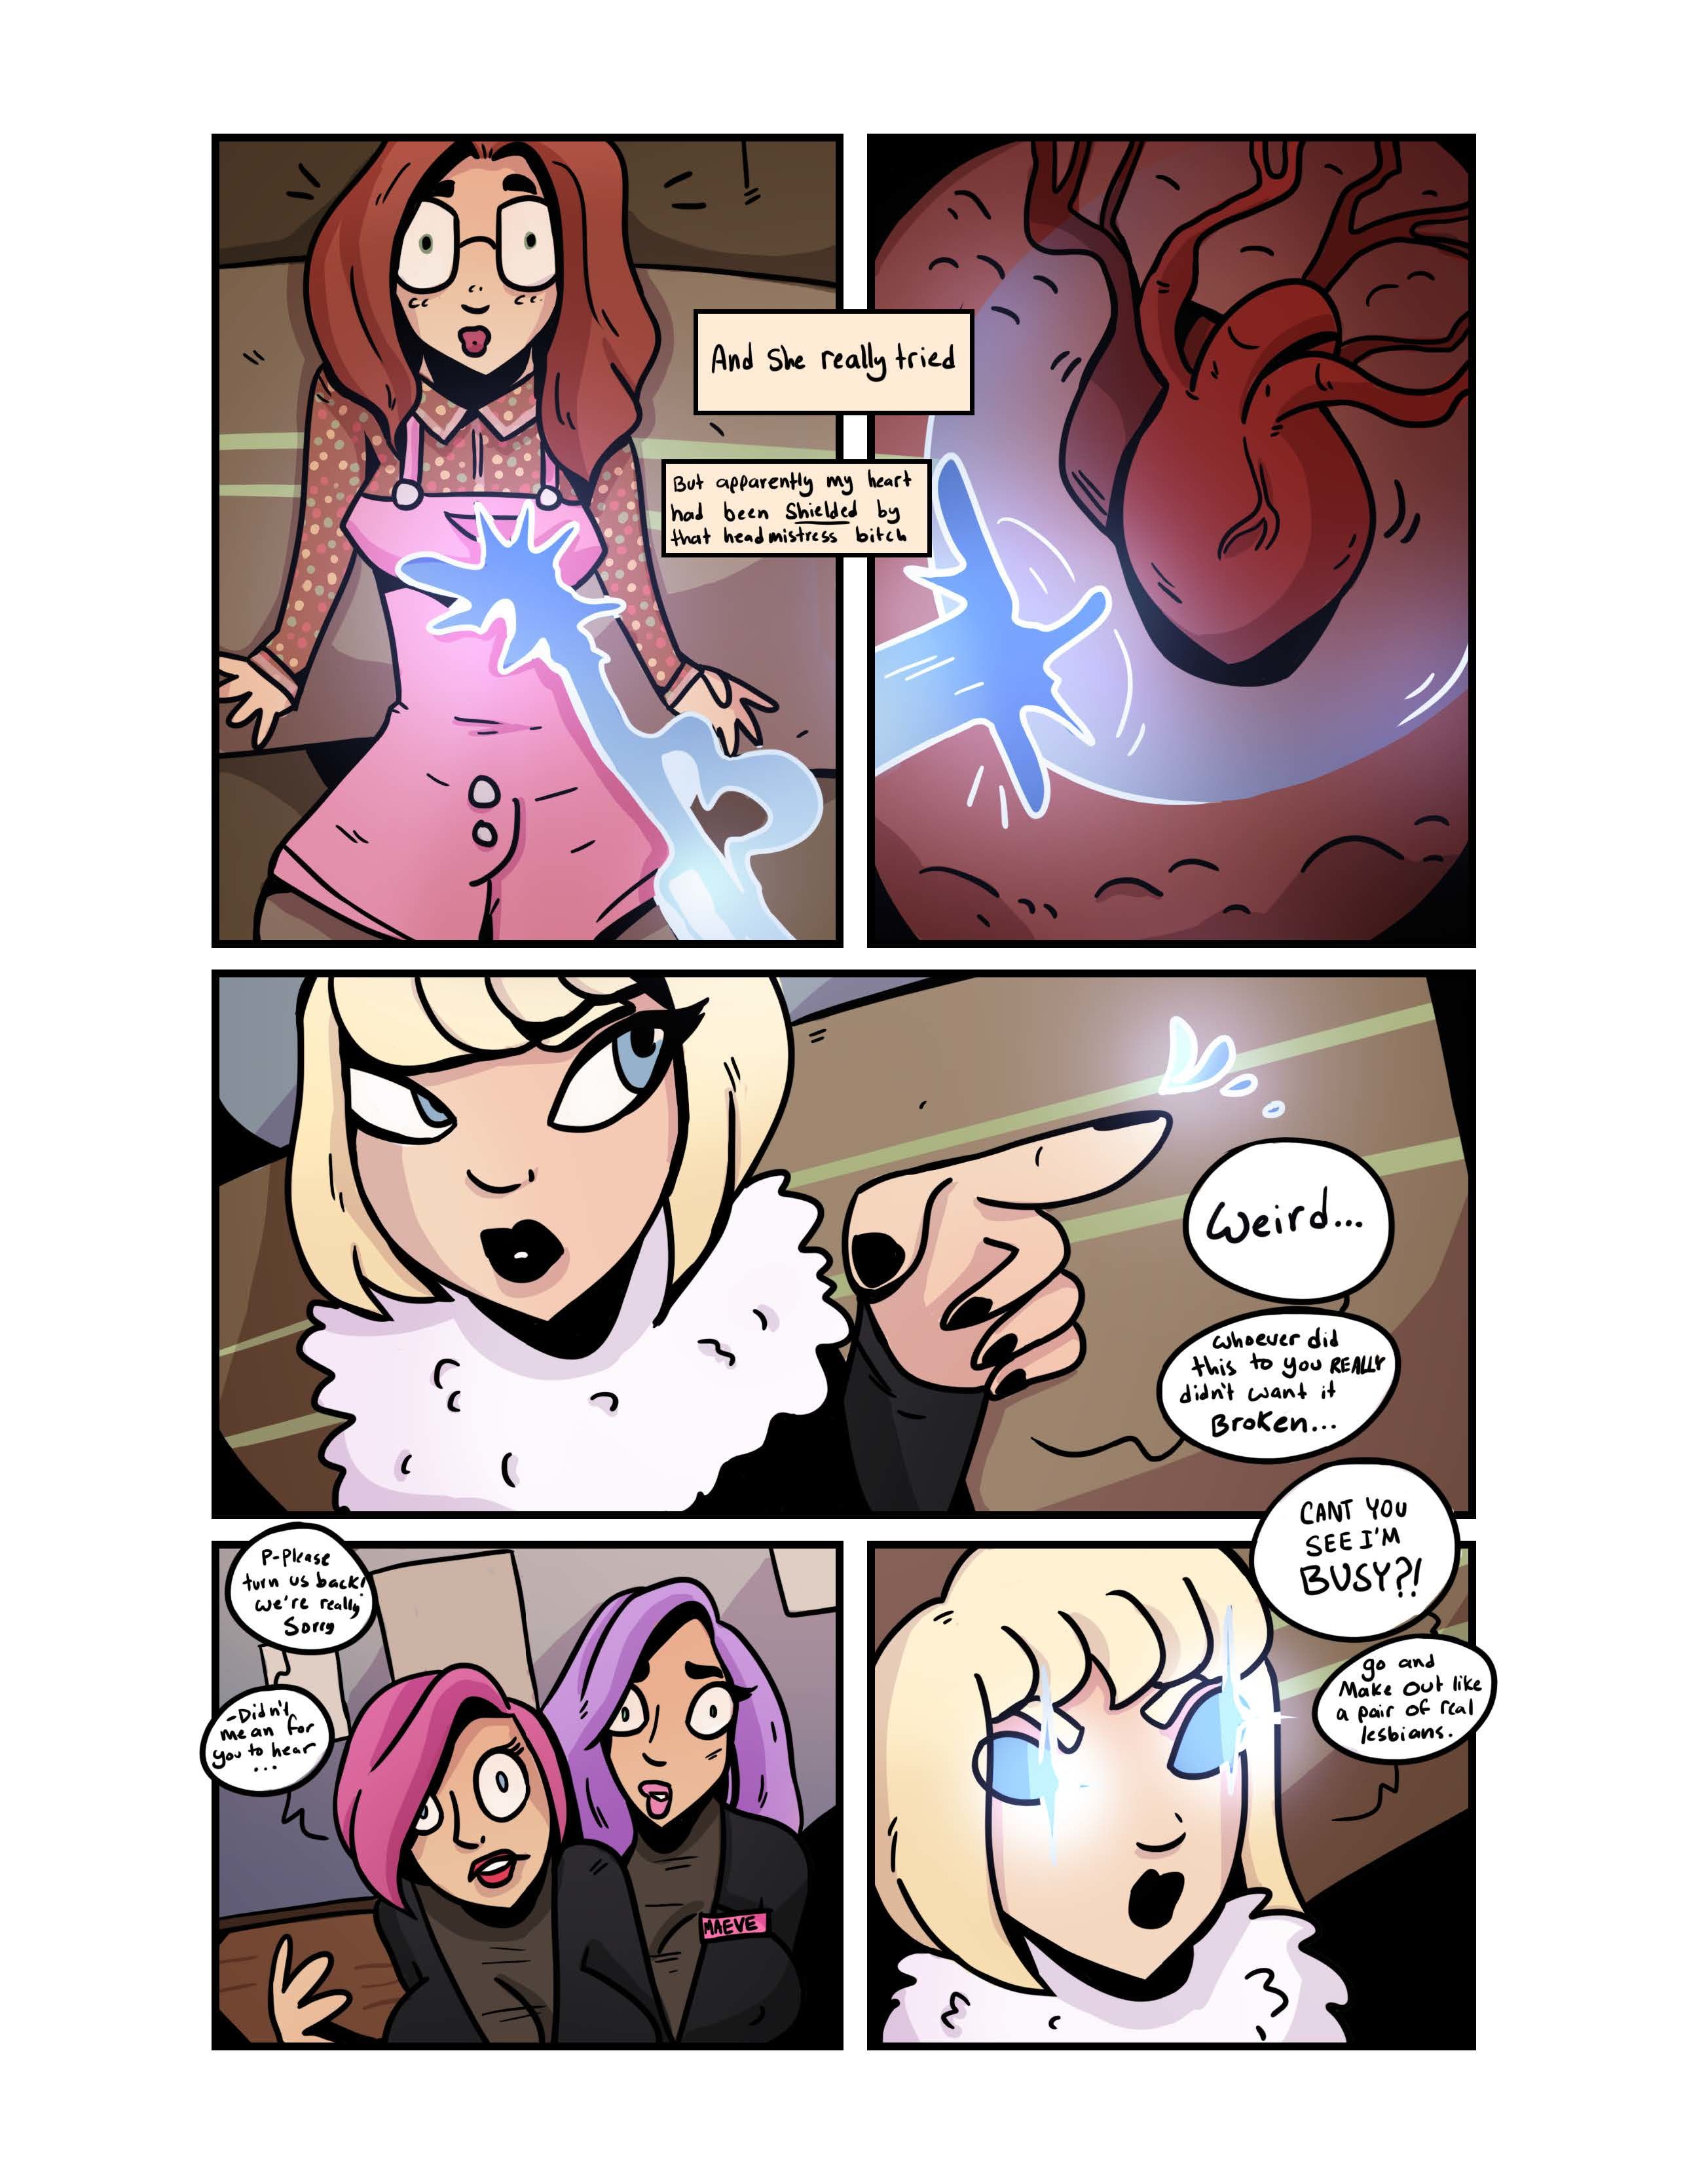 The New Girl Issue 1-5 by Grumpy TG page 33